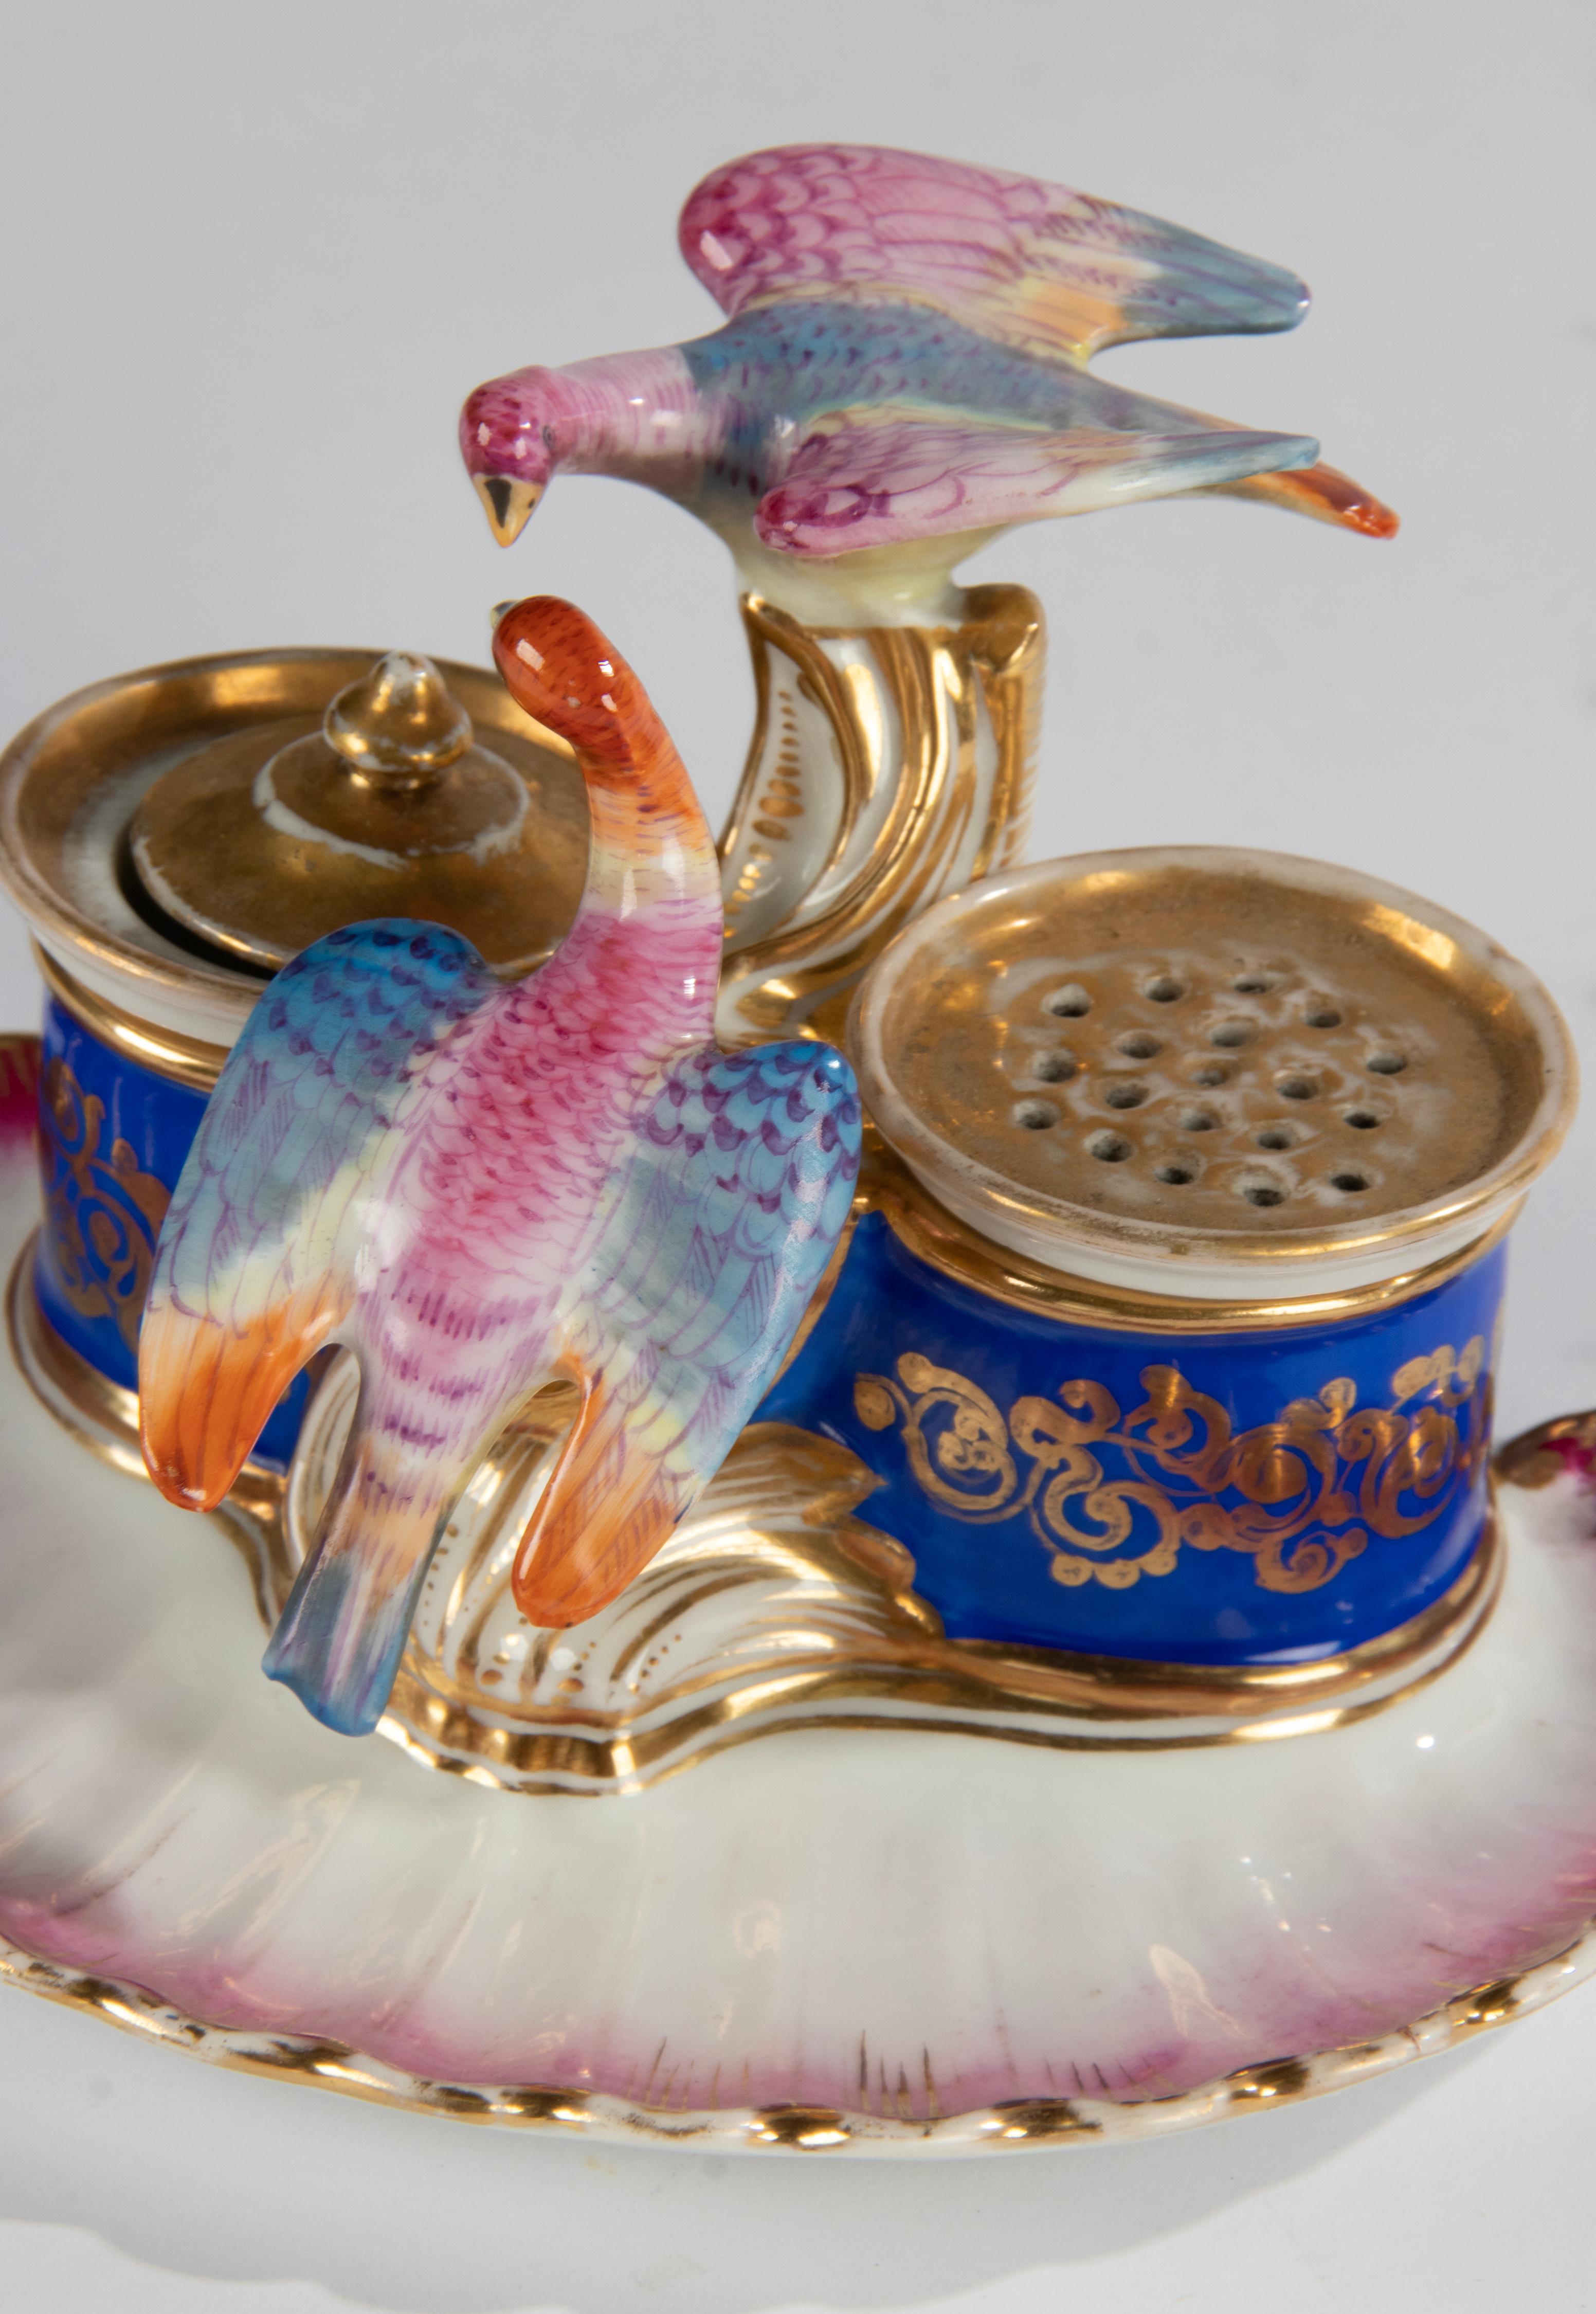 A beautiful porcelain inkwell, very decorative with colorful birds and gold colored accents. This object is not marked, but the style and design indicate that this is 'Vieux Paris' porcelain, which is rarely marked. 
The inkwell is in very good